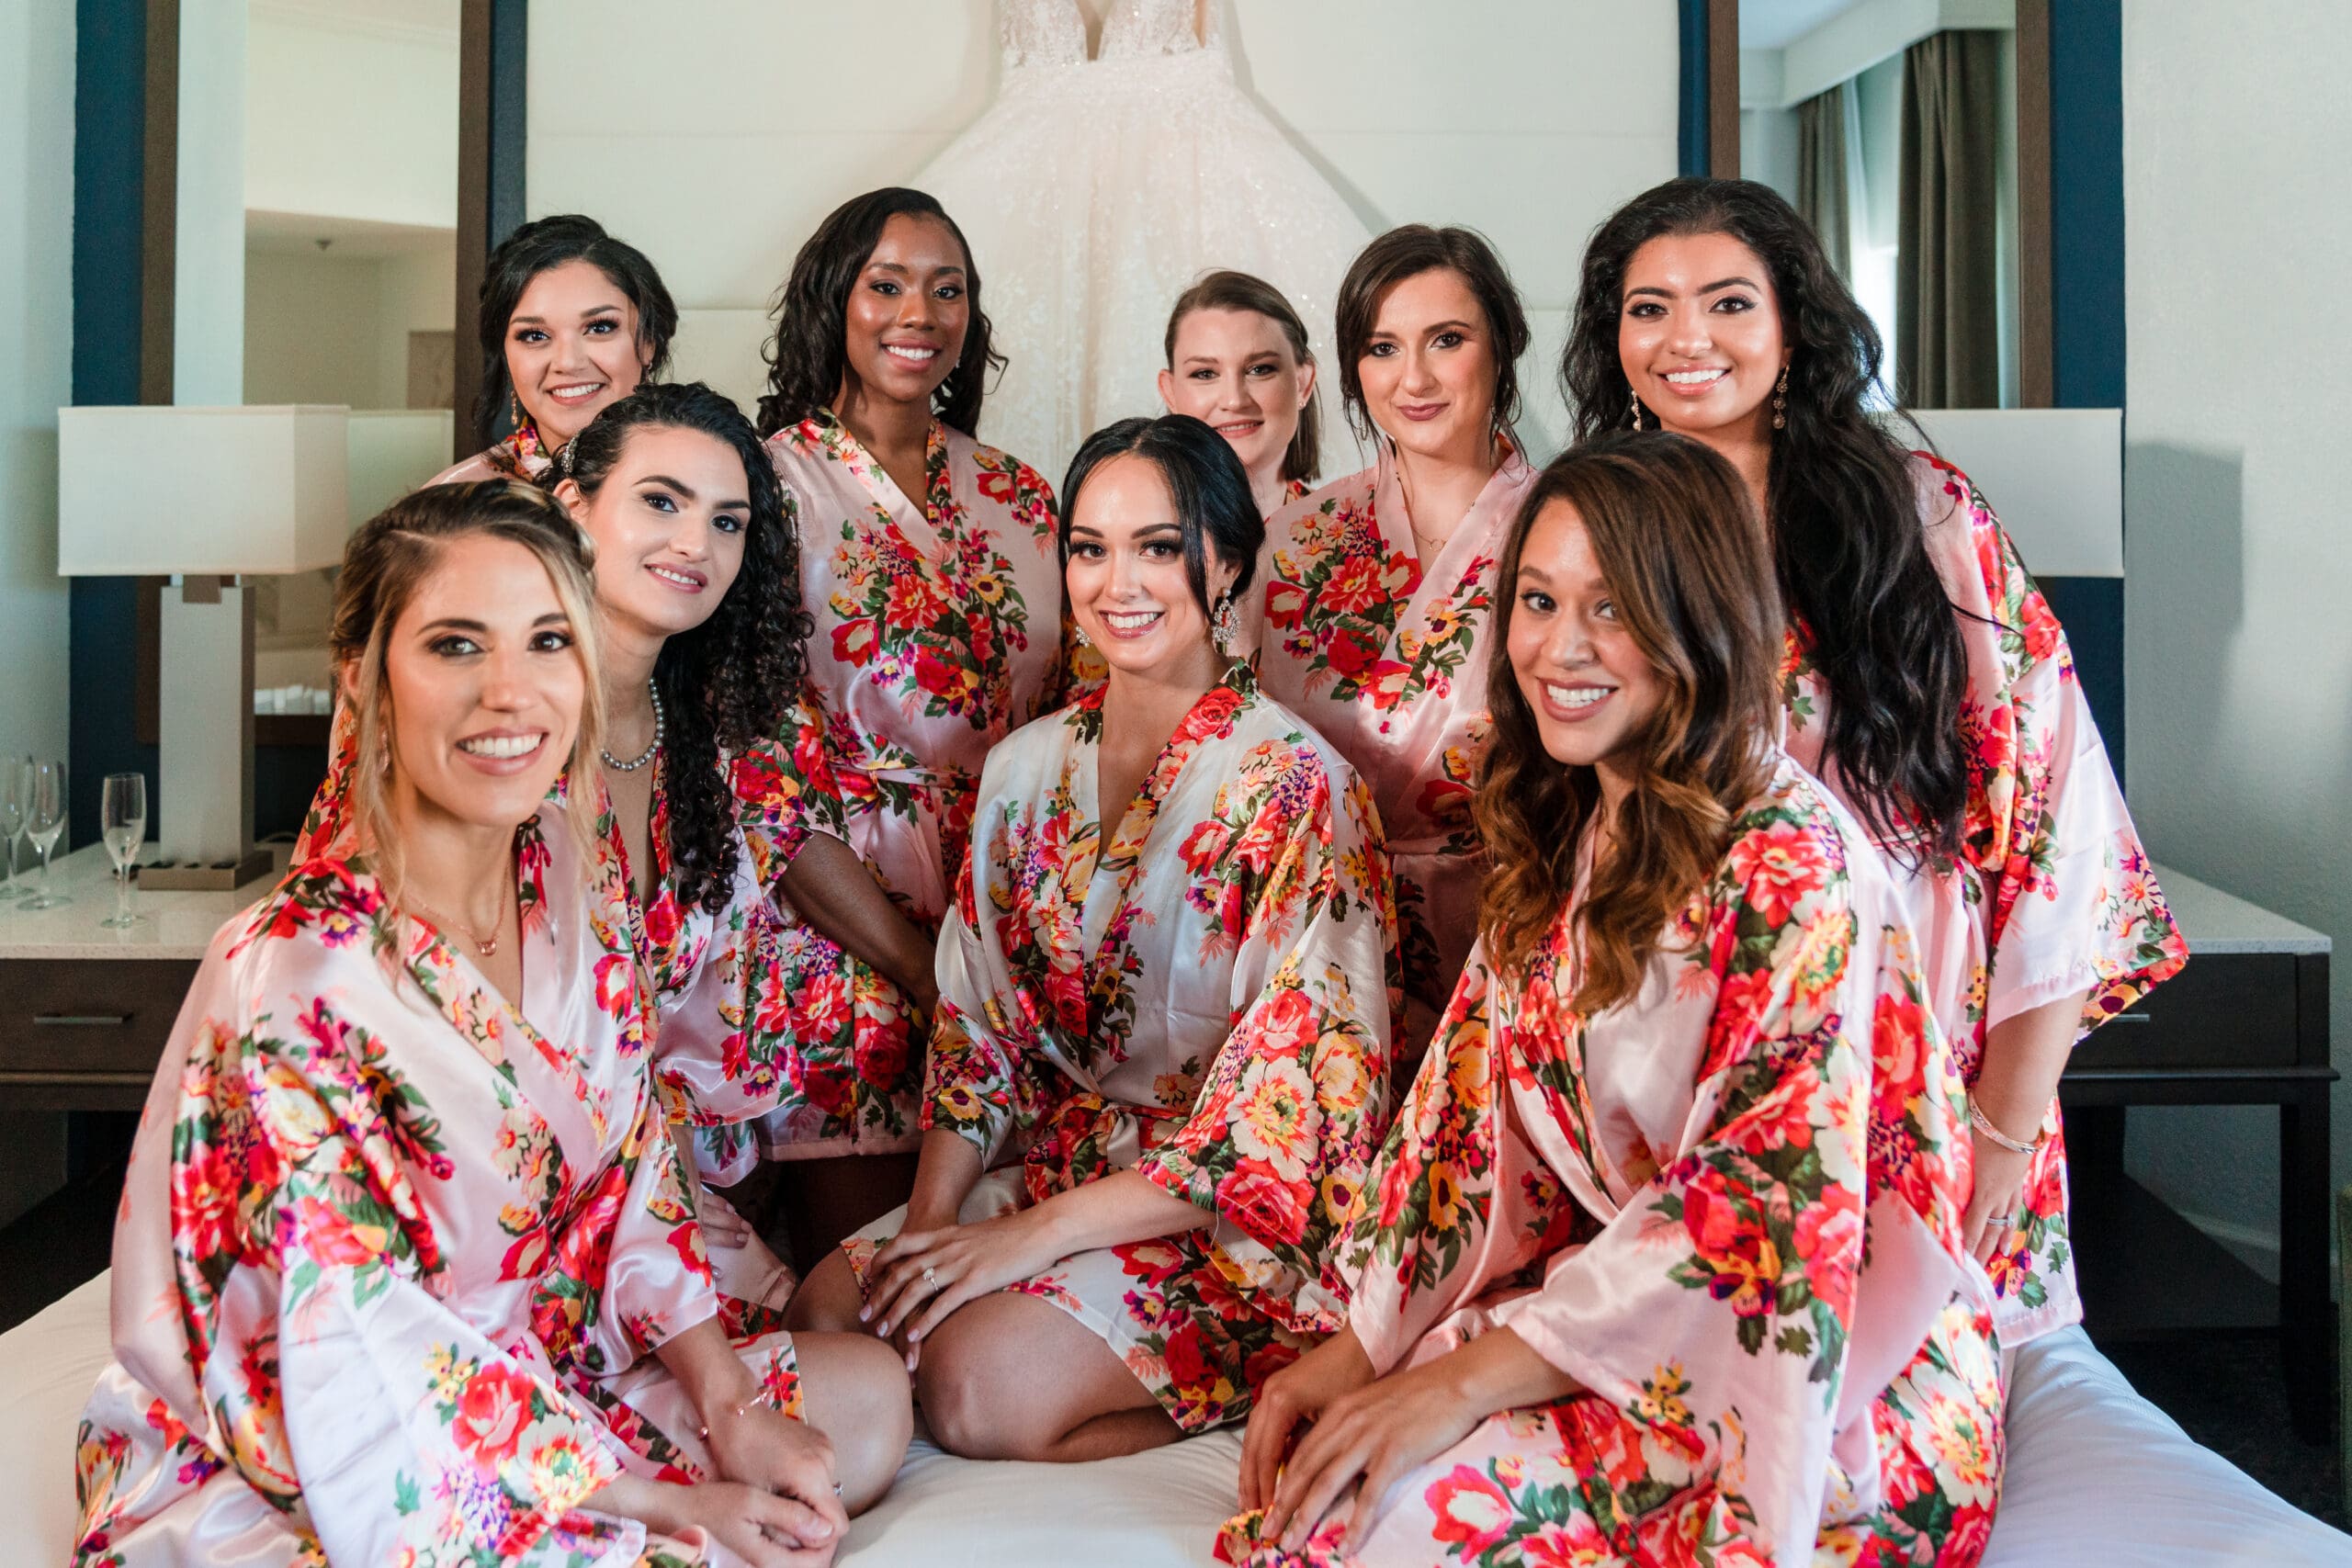 Jessica and her bridesmaids in matching flower print robes, sitting on the bed at Caribe Royale Orlando, with Jessica's wedding dress hanging in the background.